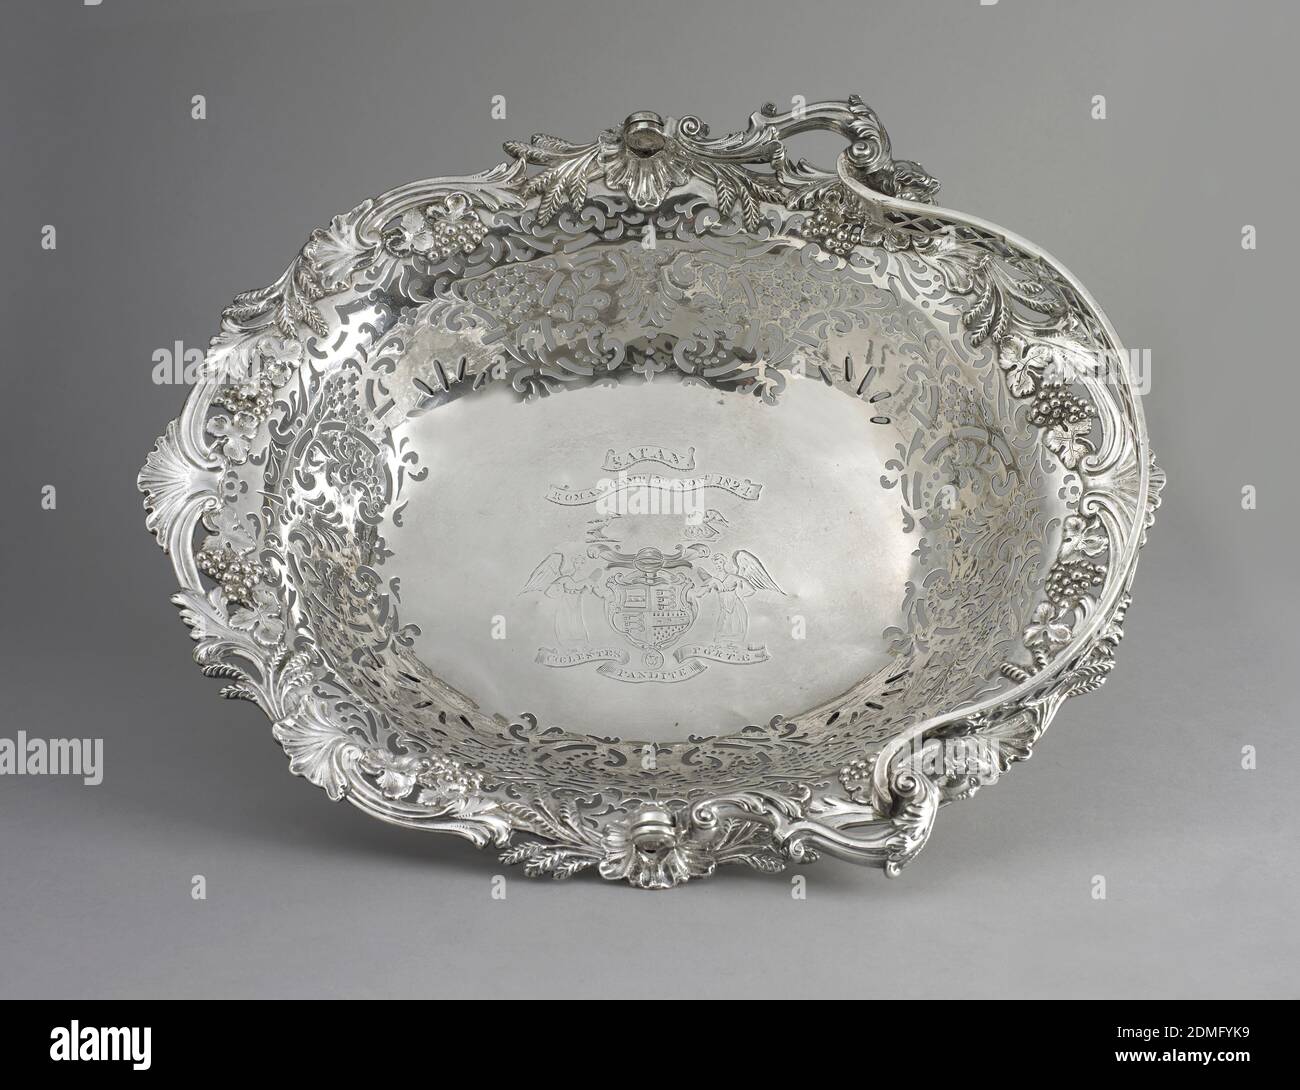 basket, silver, George II cake basket. Oval basket ajoure with rosetted trelliswork and foliate devices, the rim applied with grape clusters and wheat ears; the hinged bail handle with enleafed scrolls and female busts; on scroll feet headed with a frilled shell., London, England, 1758, metalwork, Decorative Arts, basket Stock Photo